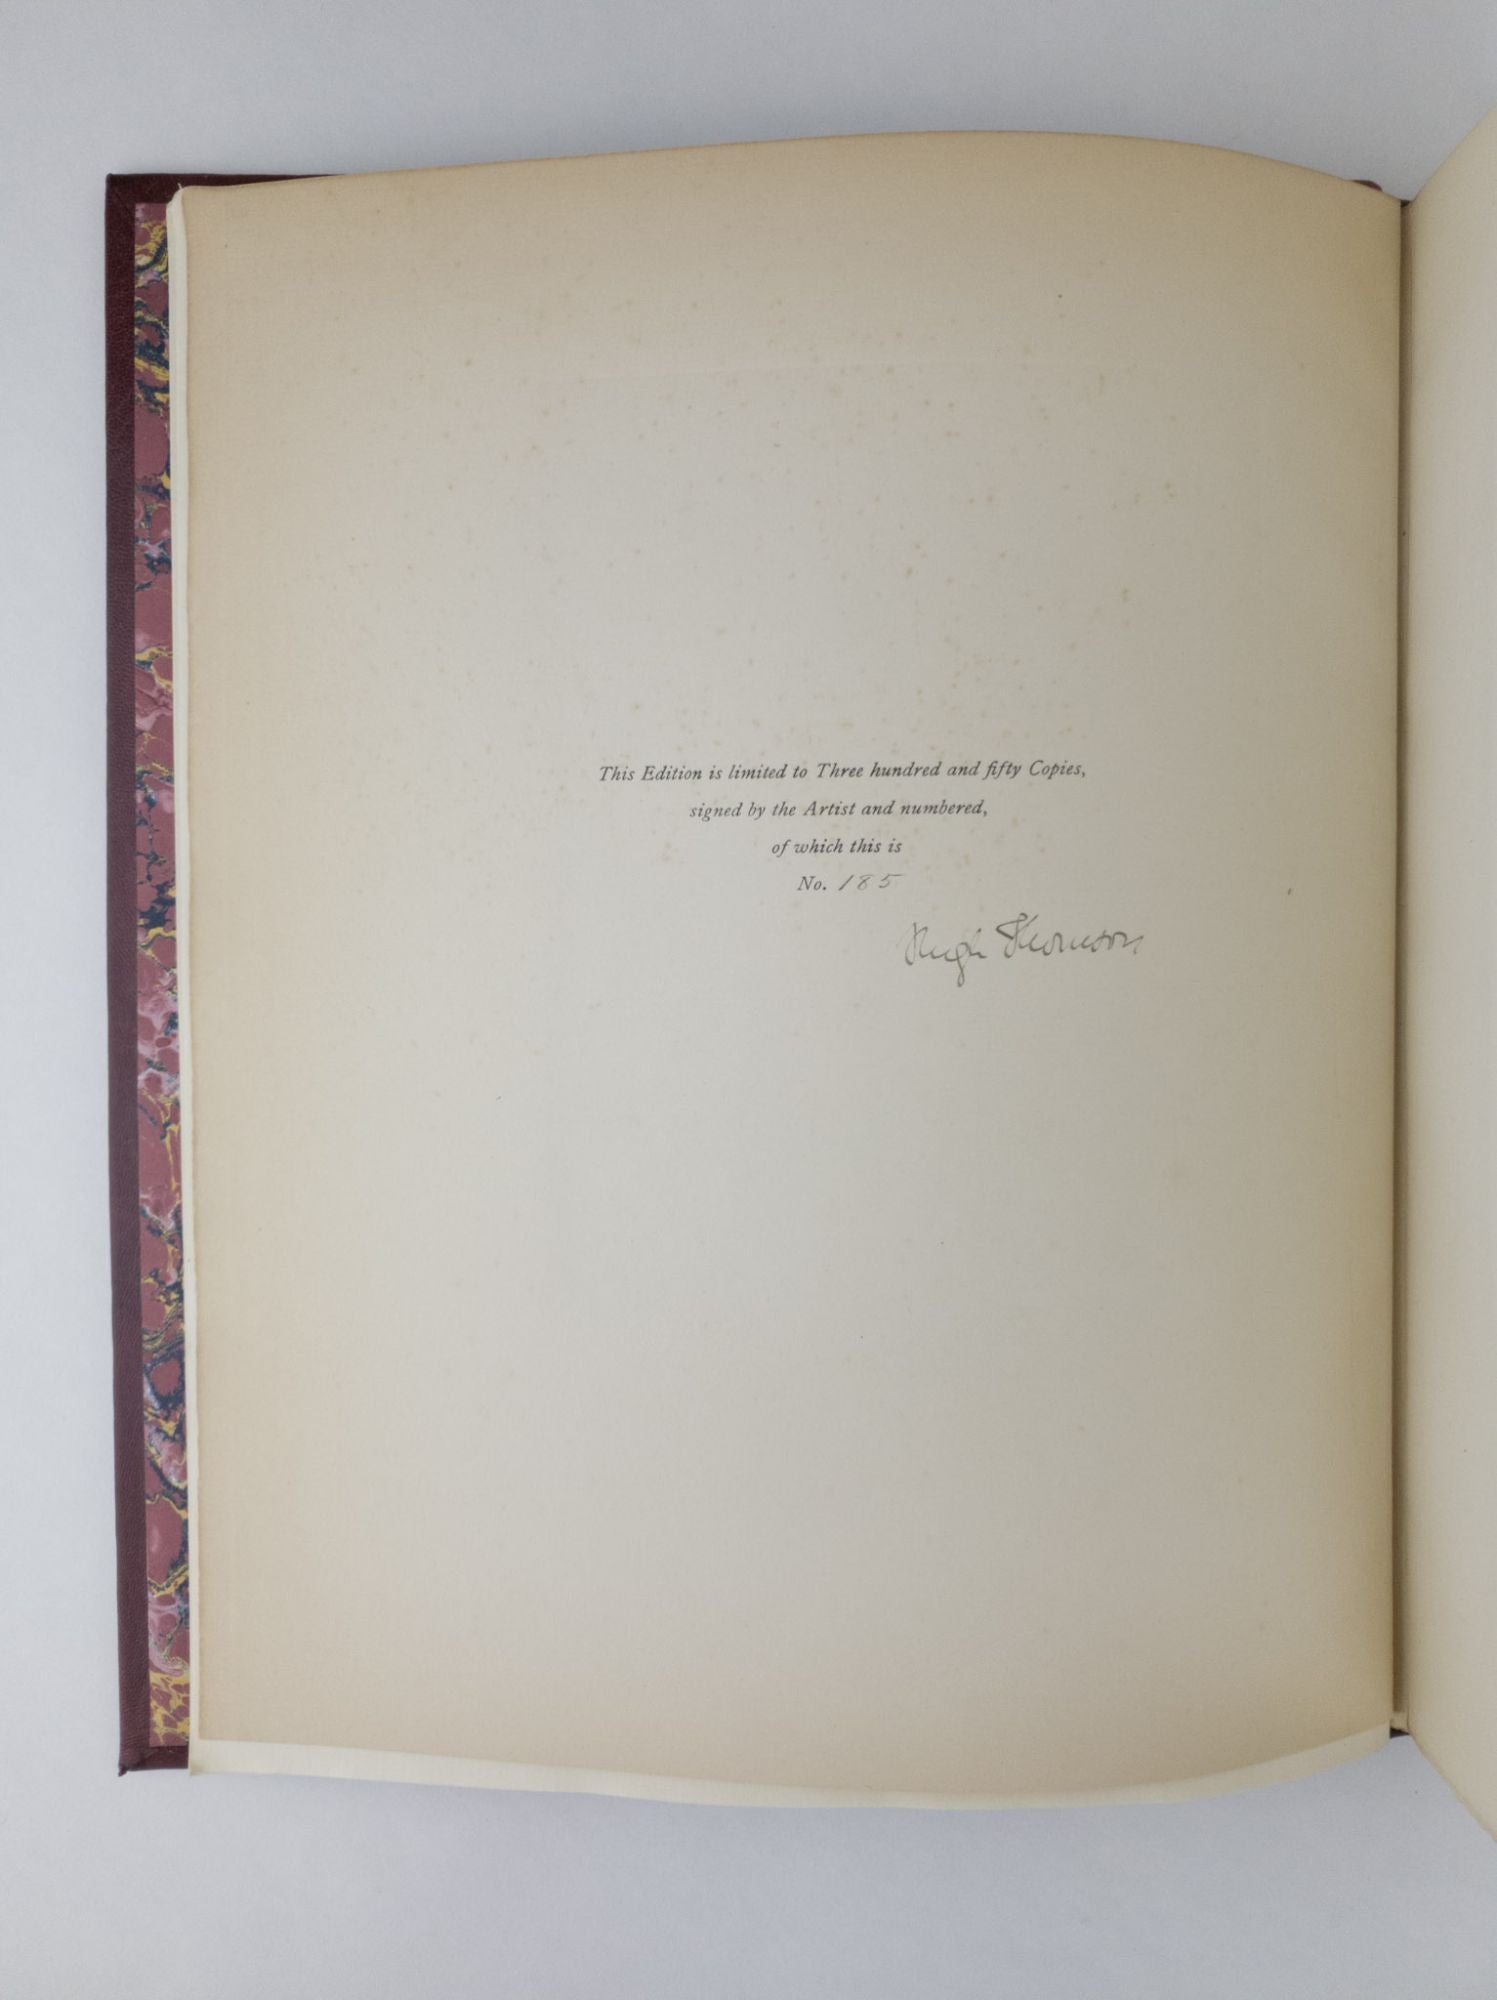 Product Image for SHE STOOPS TO CONQUER OR THE MISTAKES OF A NIGHT [Inscribed By Rudyard Kipling]